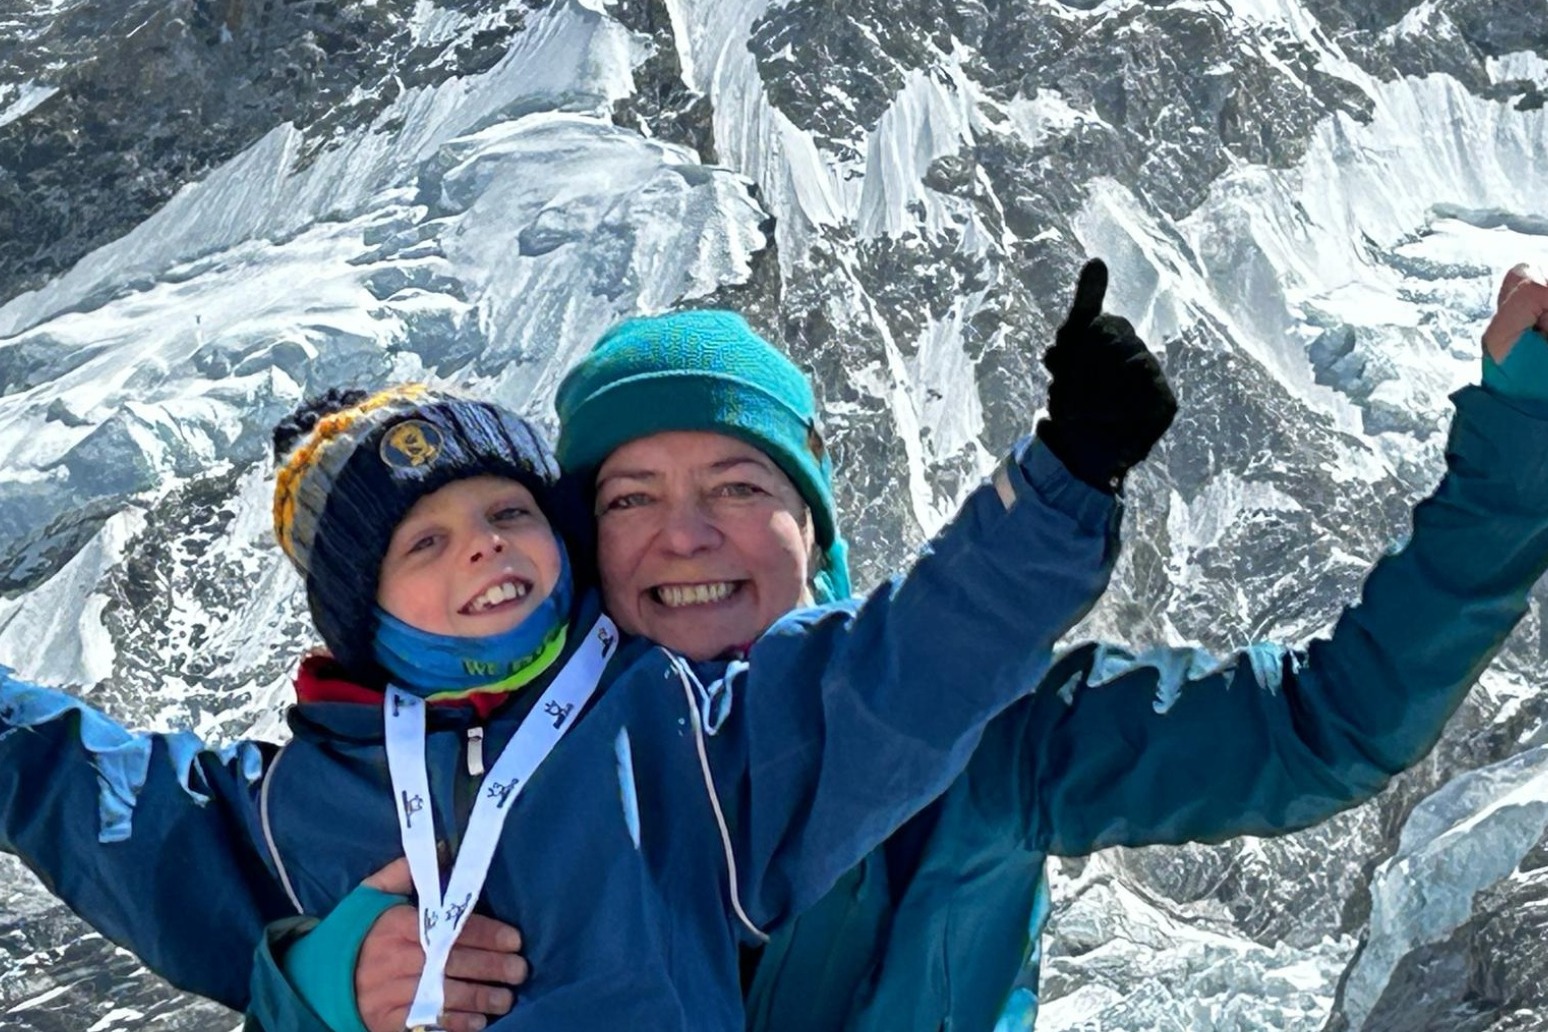 Eight year old reaches Everest base camp 